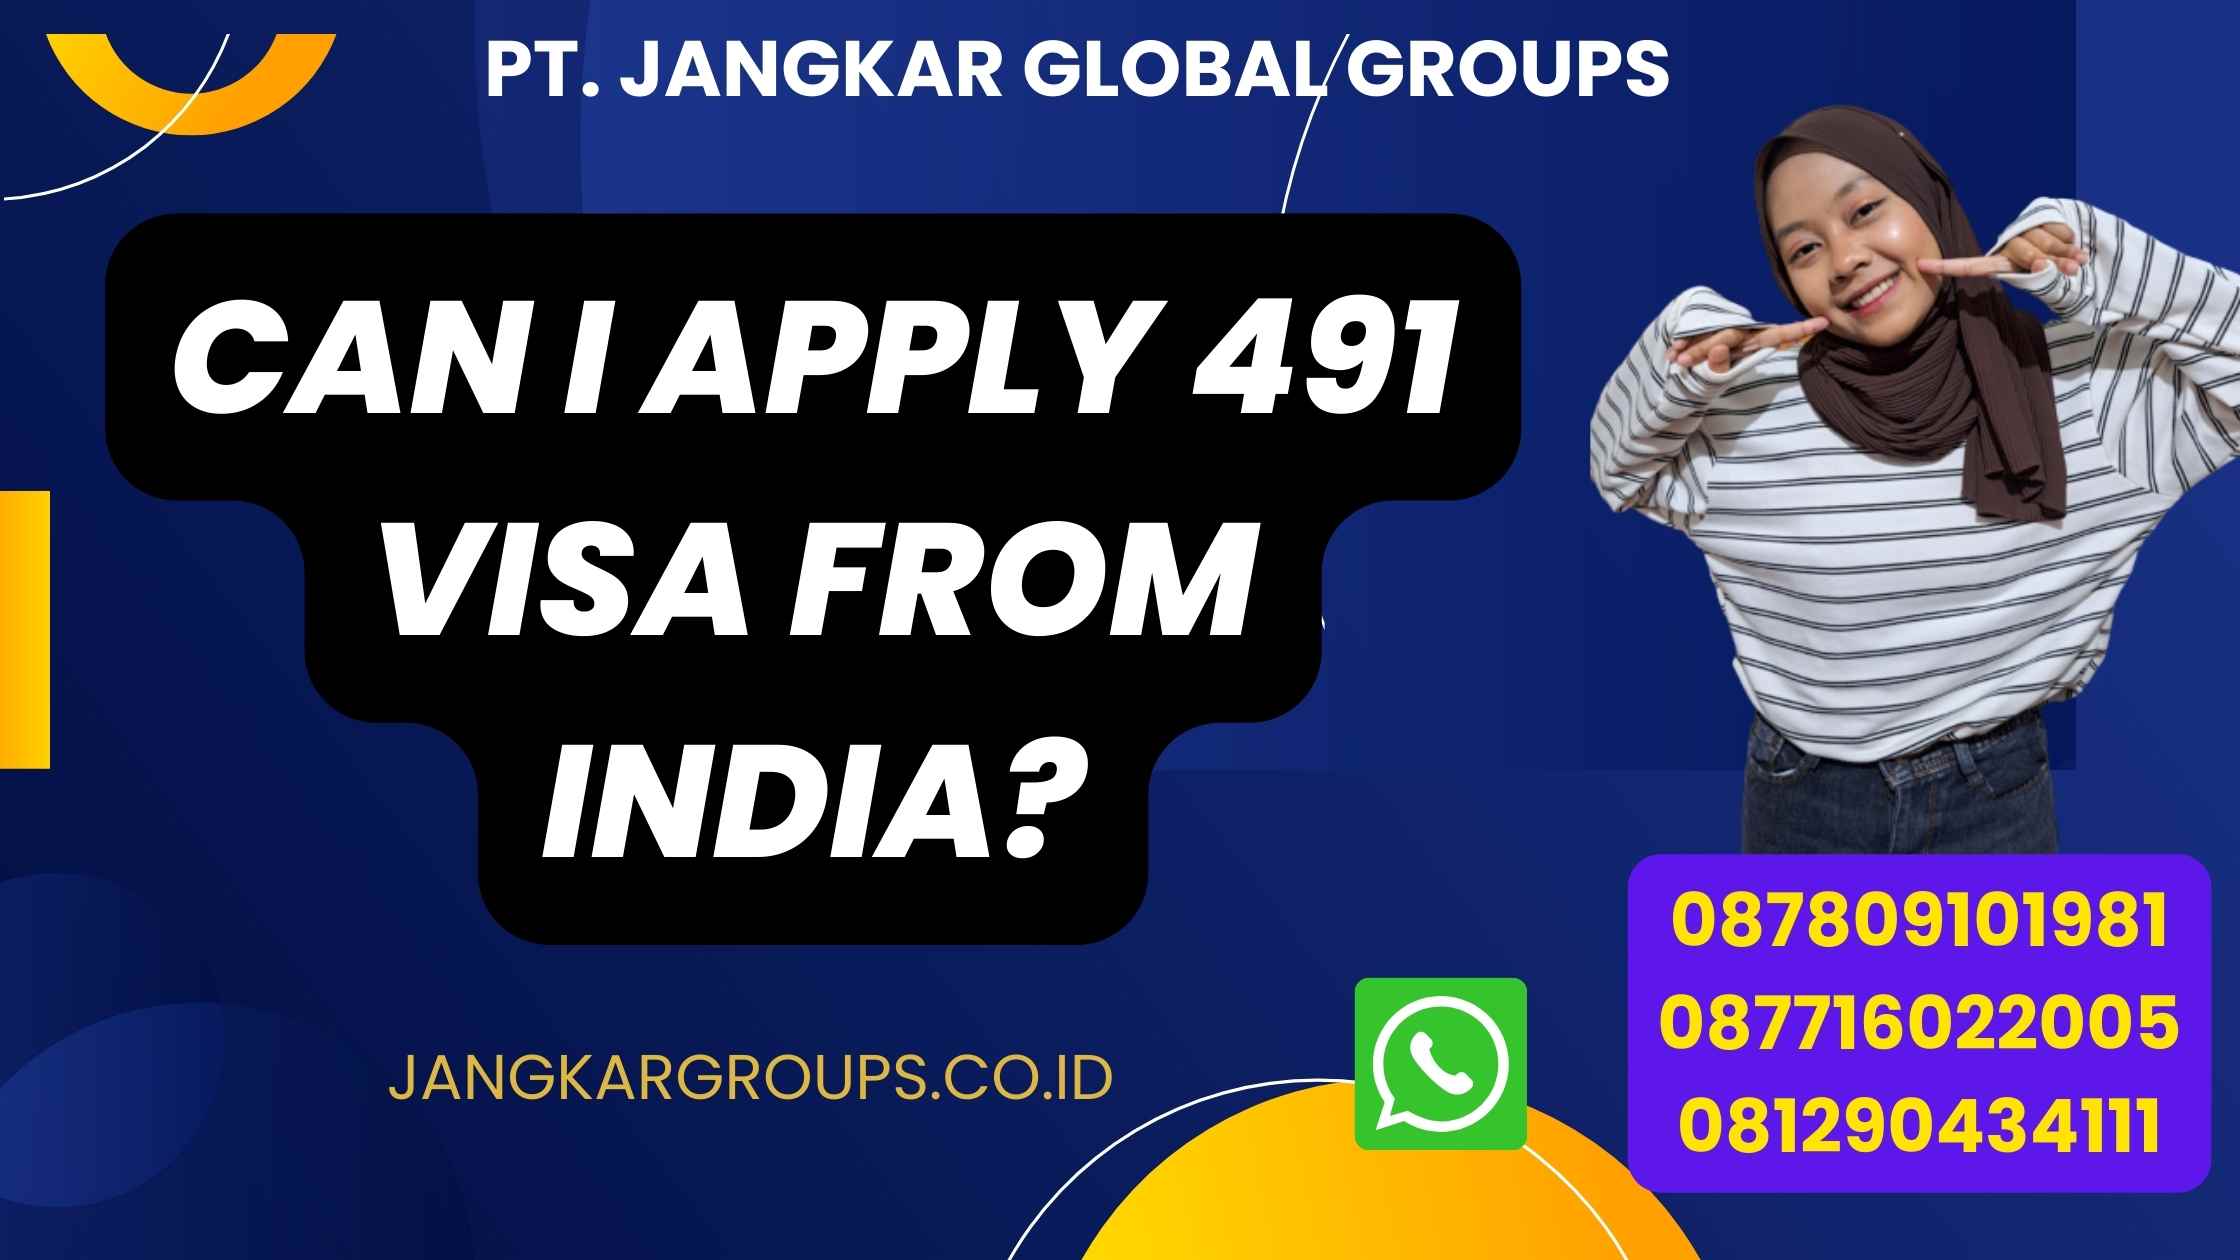 Can I Apply 491 Visa From India?